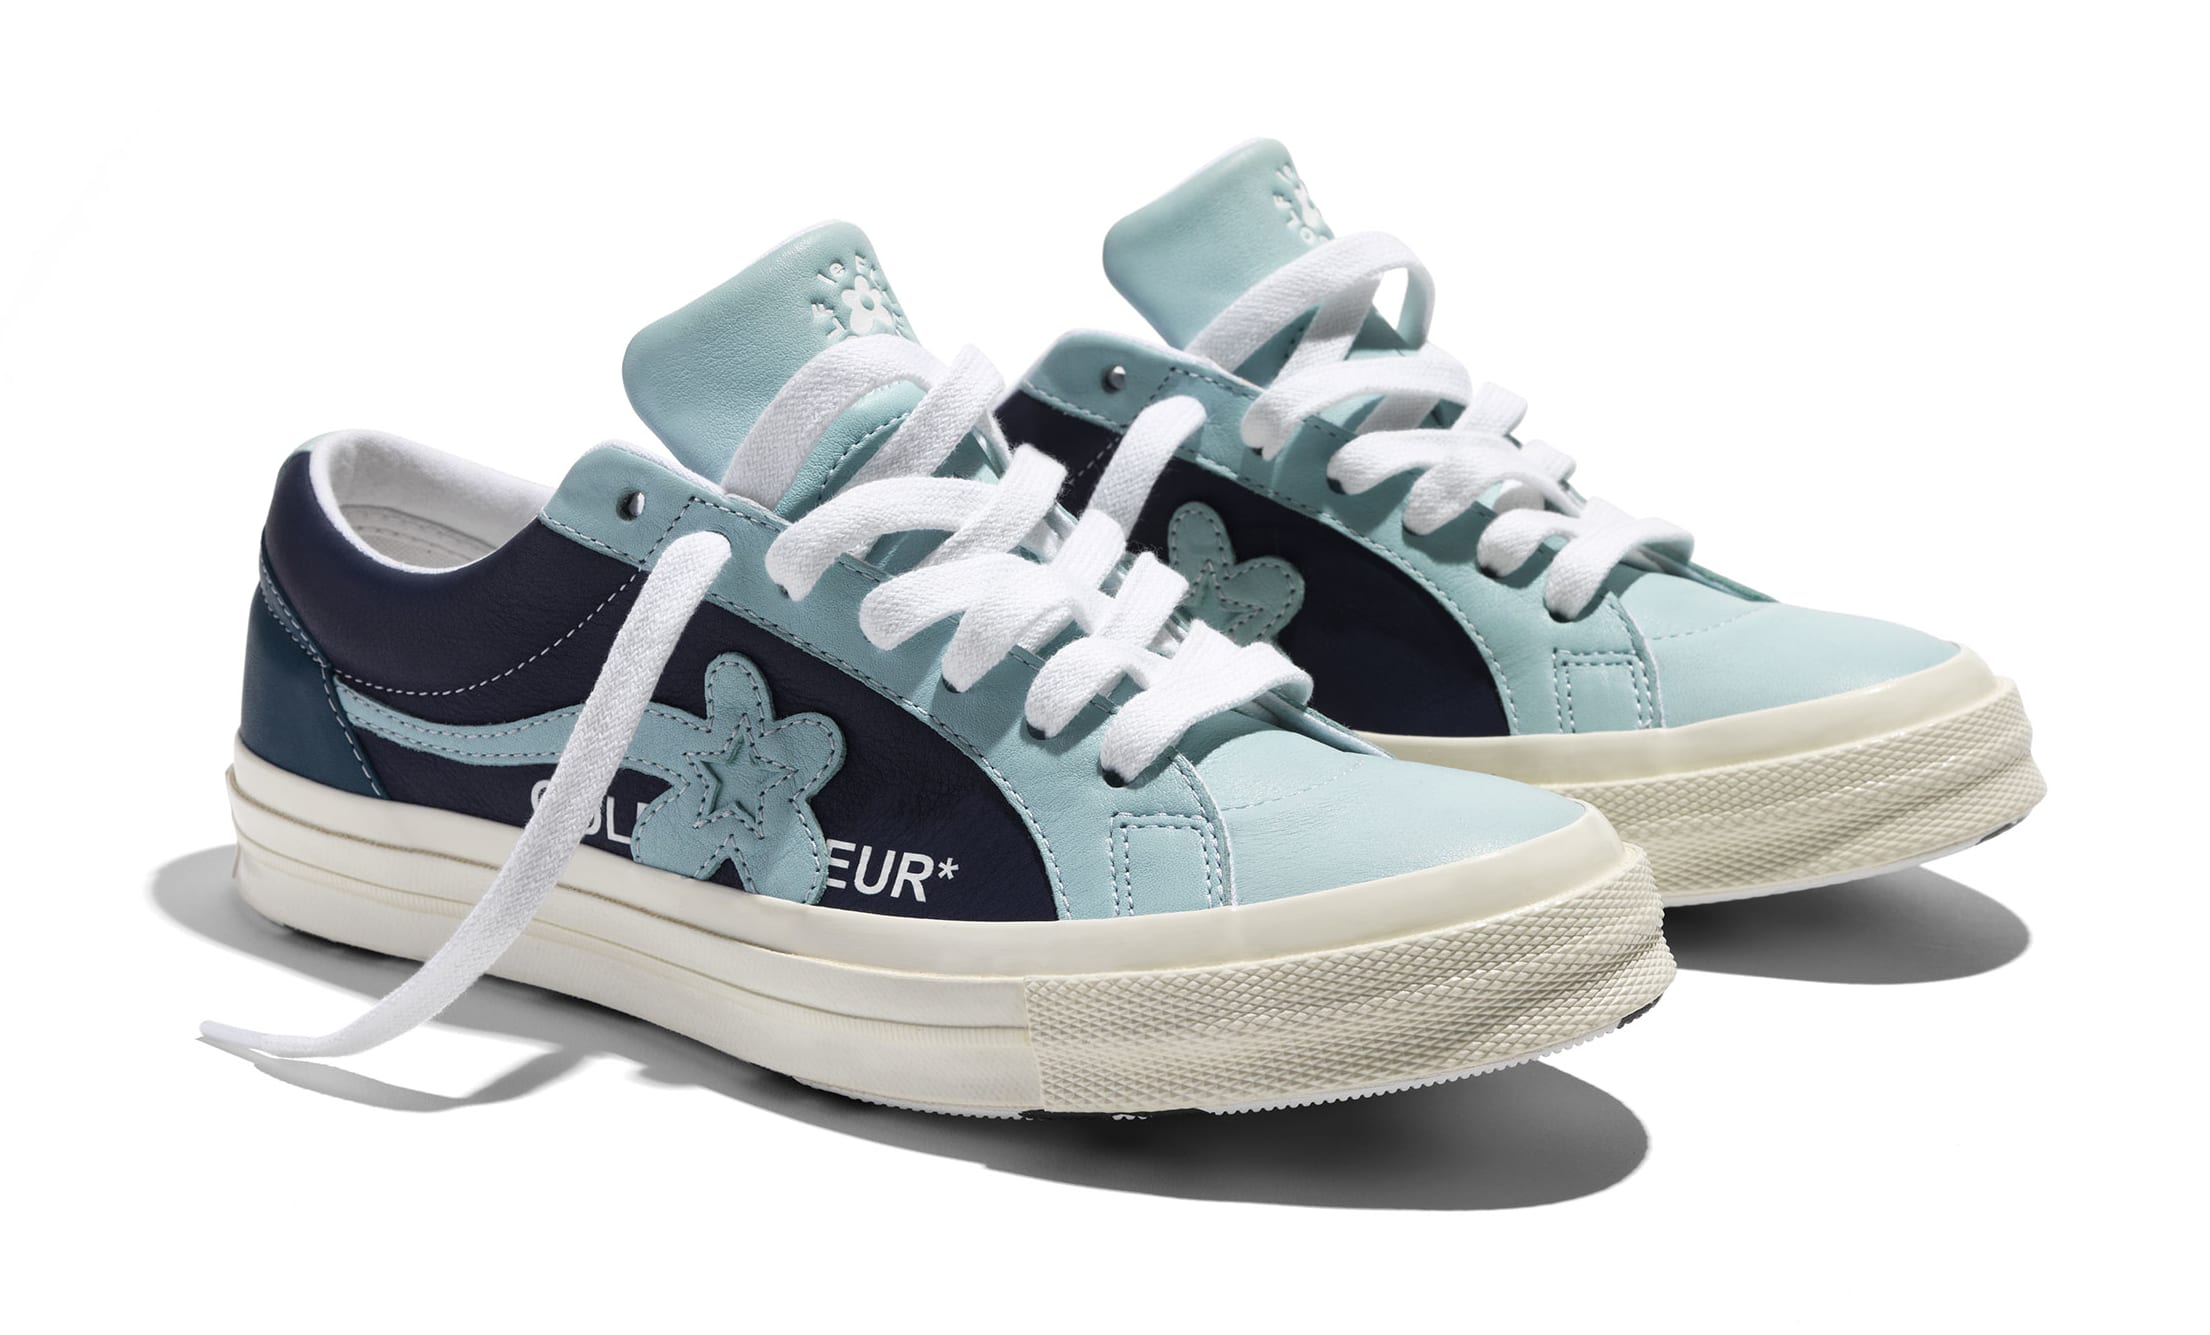 A bordo Compuesto neumático Another Look at the Converse Golf Le Fleur 'Industrial' Pack | Complex